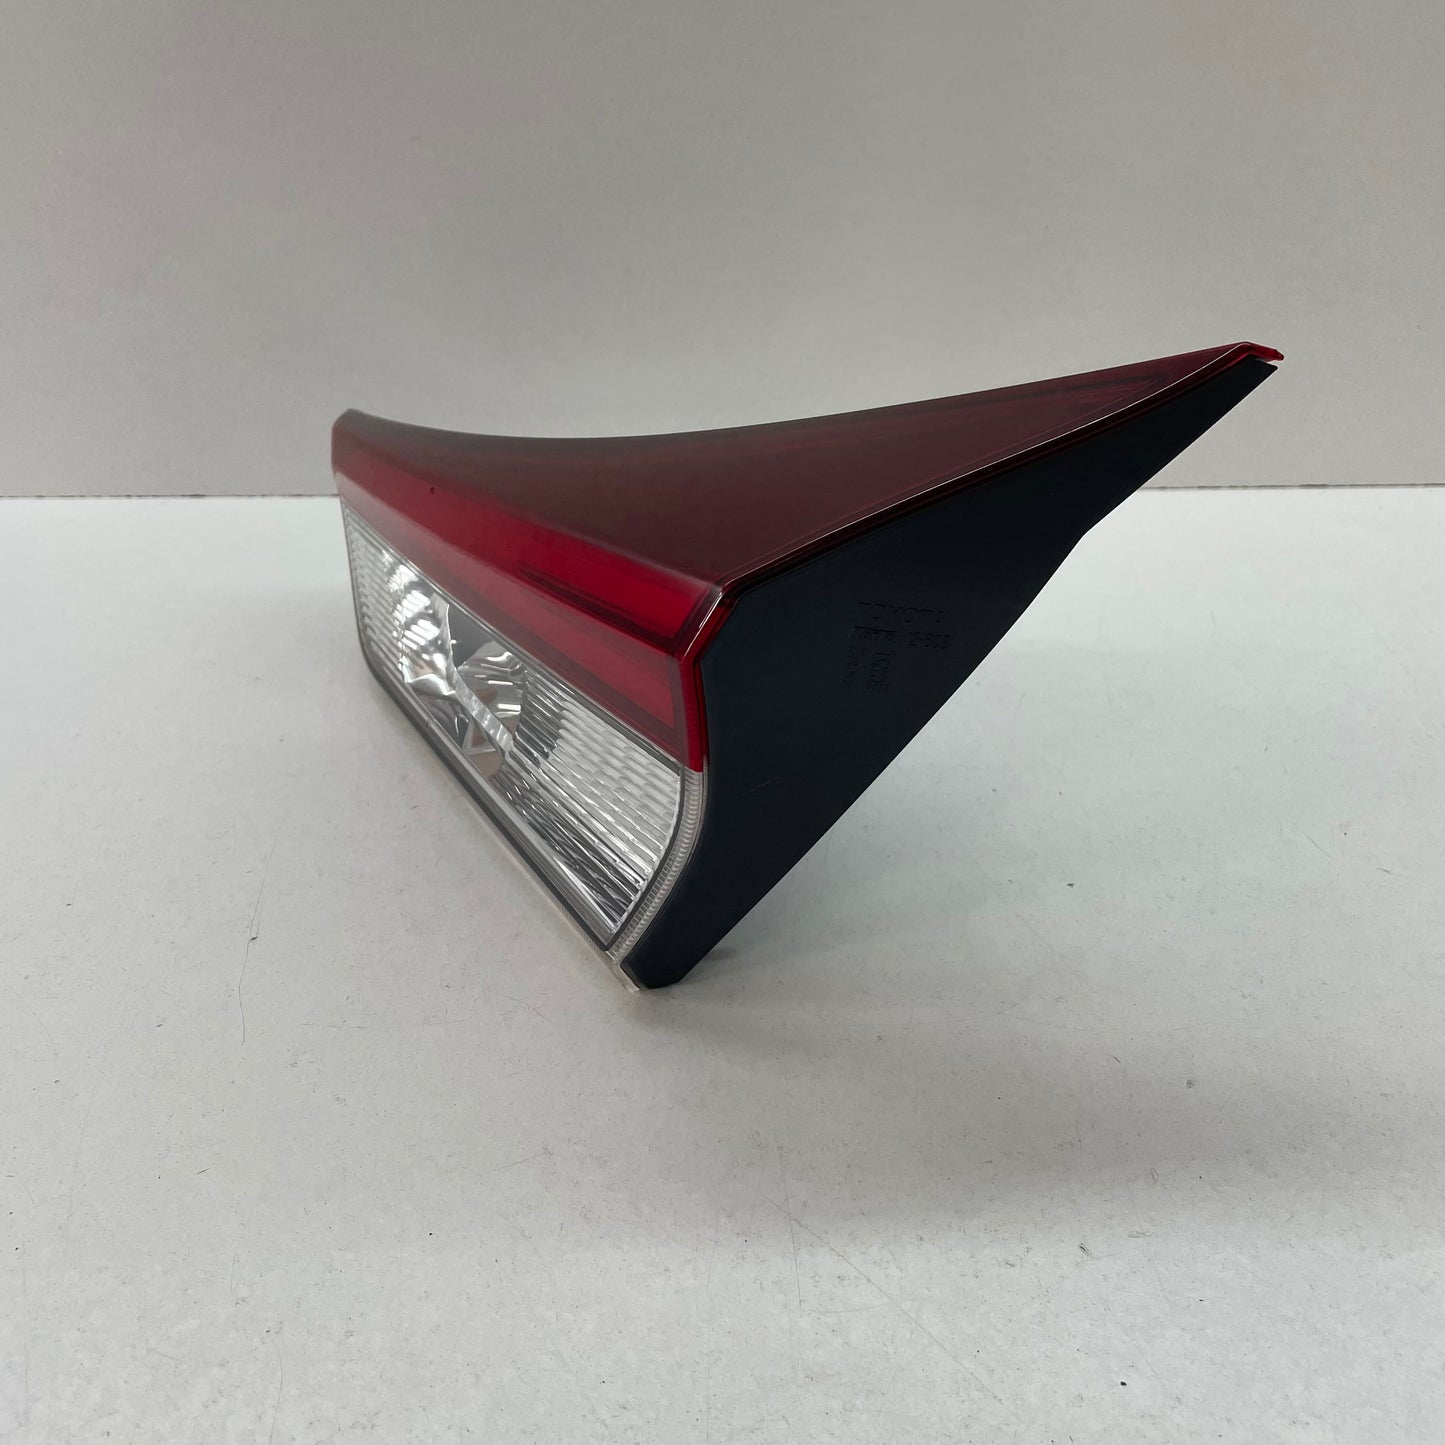 Toyota Corolla Hatchback Tailgate Lamp Right Side ZRE182R 2015 2016 2017 2018